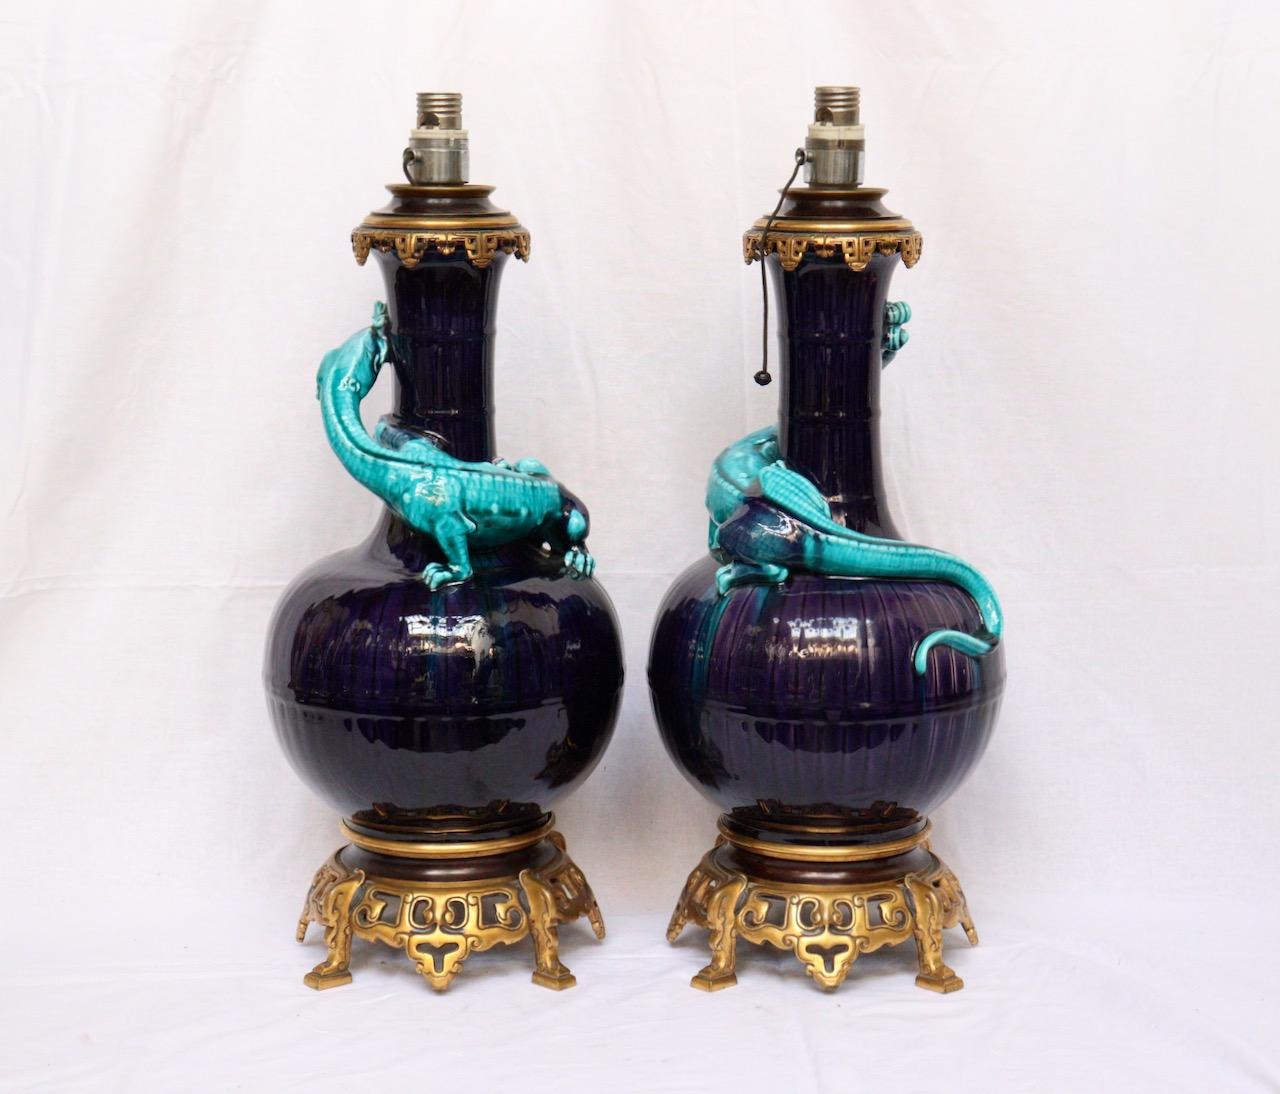 Chinoiserie Pair of Théodore Deck Lizards Vases Ormolu-Mounted in Lamps